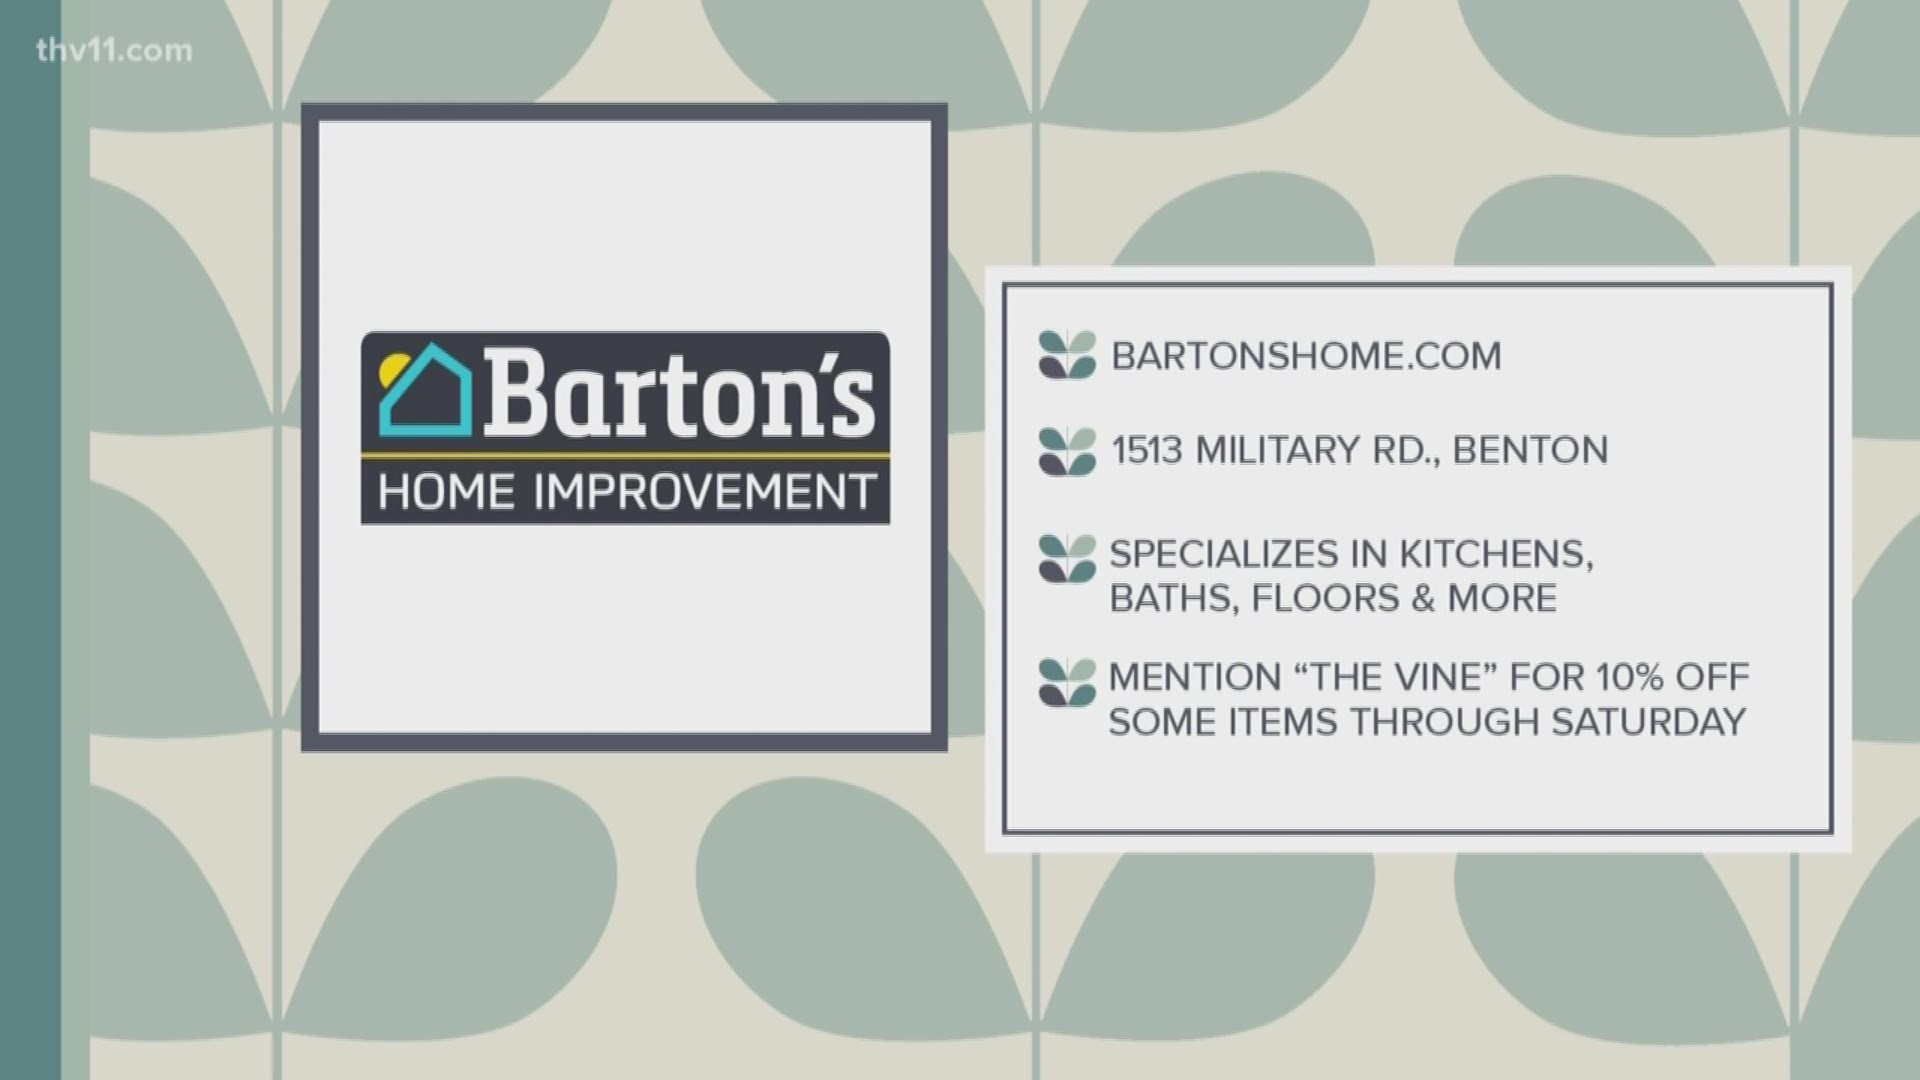 Whether you're renovating, adding on, or building new, Barton's Home Improvement has the quality flooring, cabinets, doors, and more that you need!